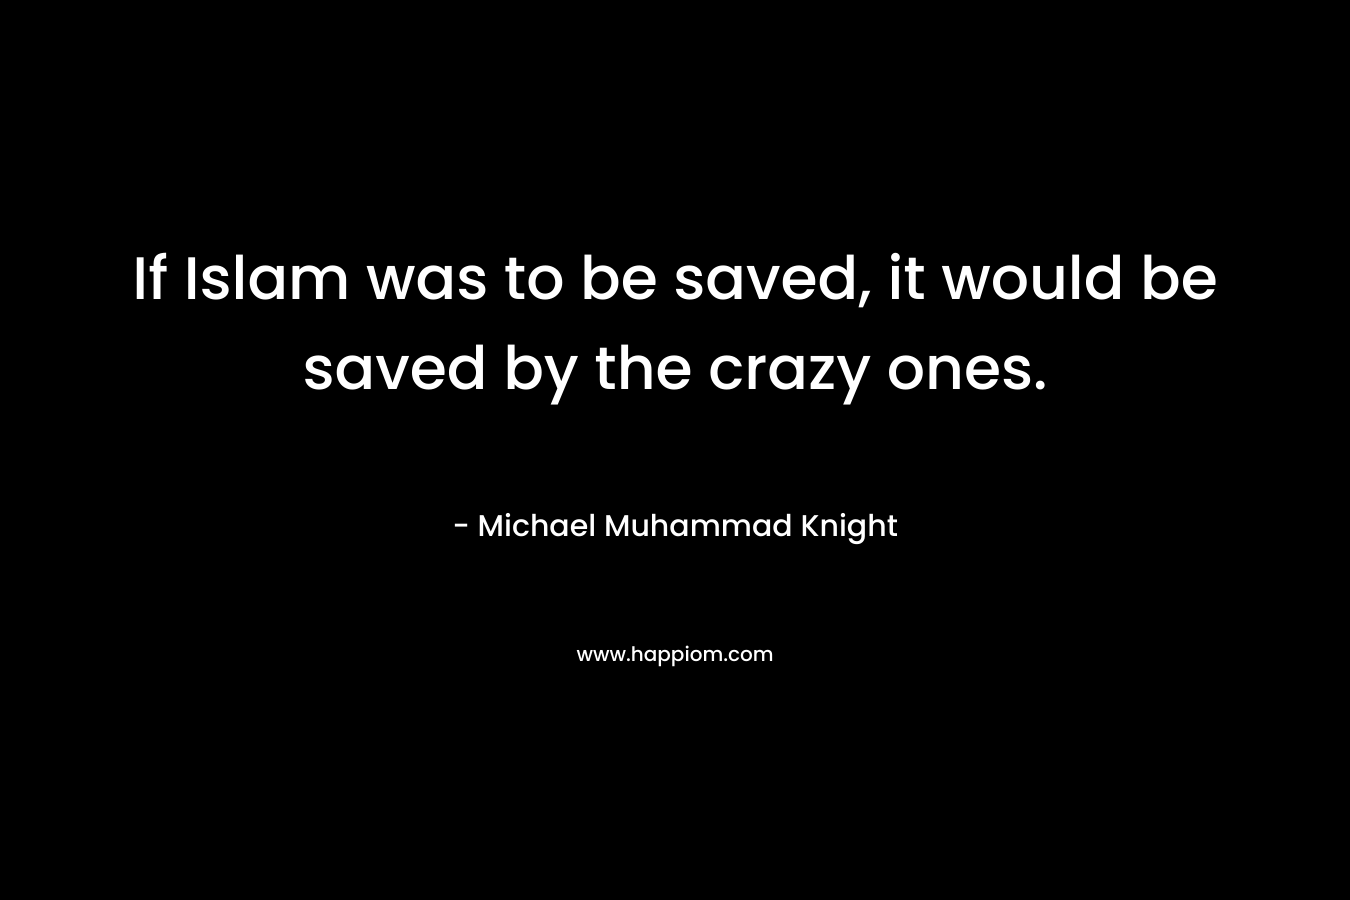 If Islam was to be saved, it would be saved by the crazy ones.